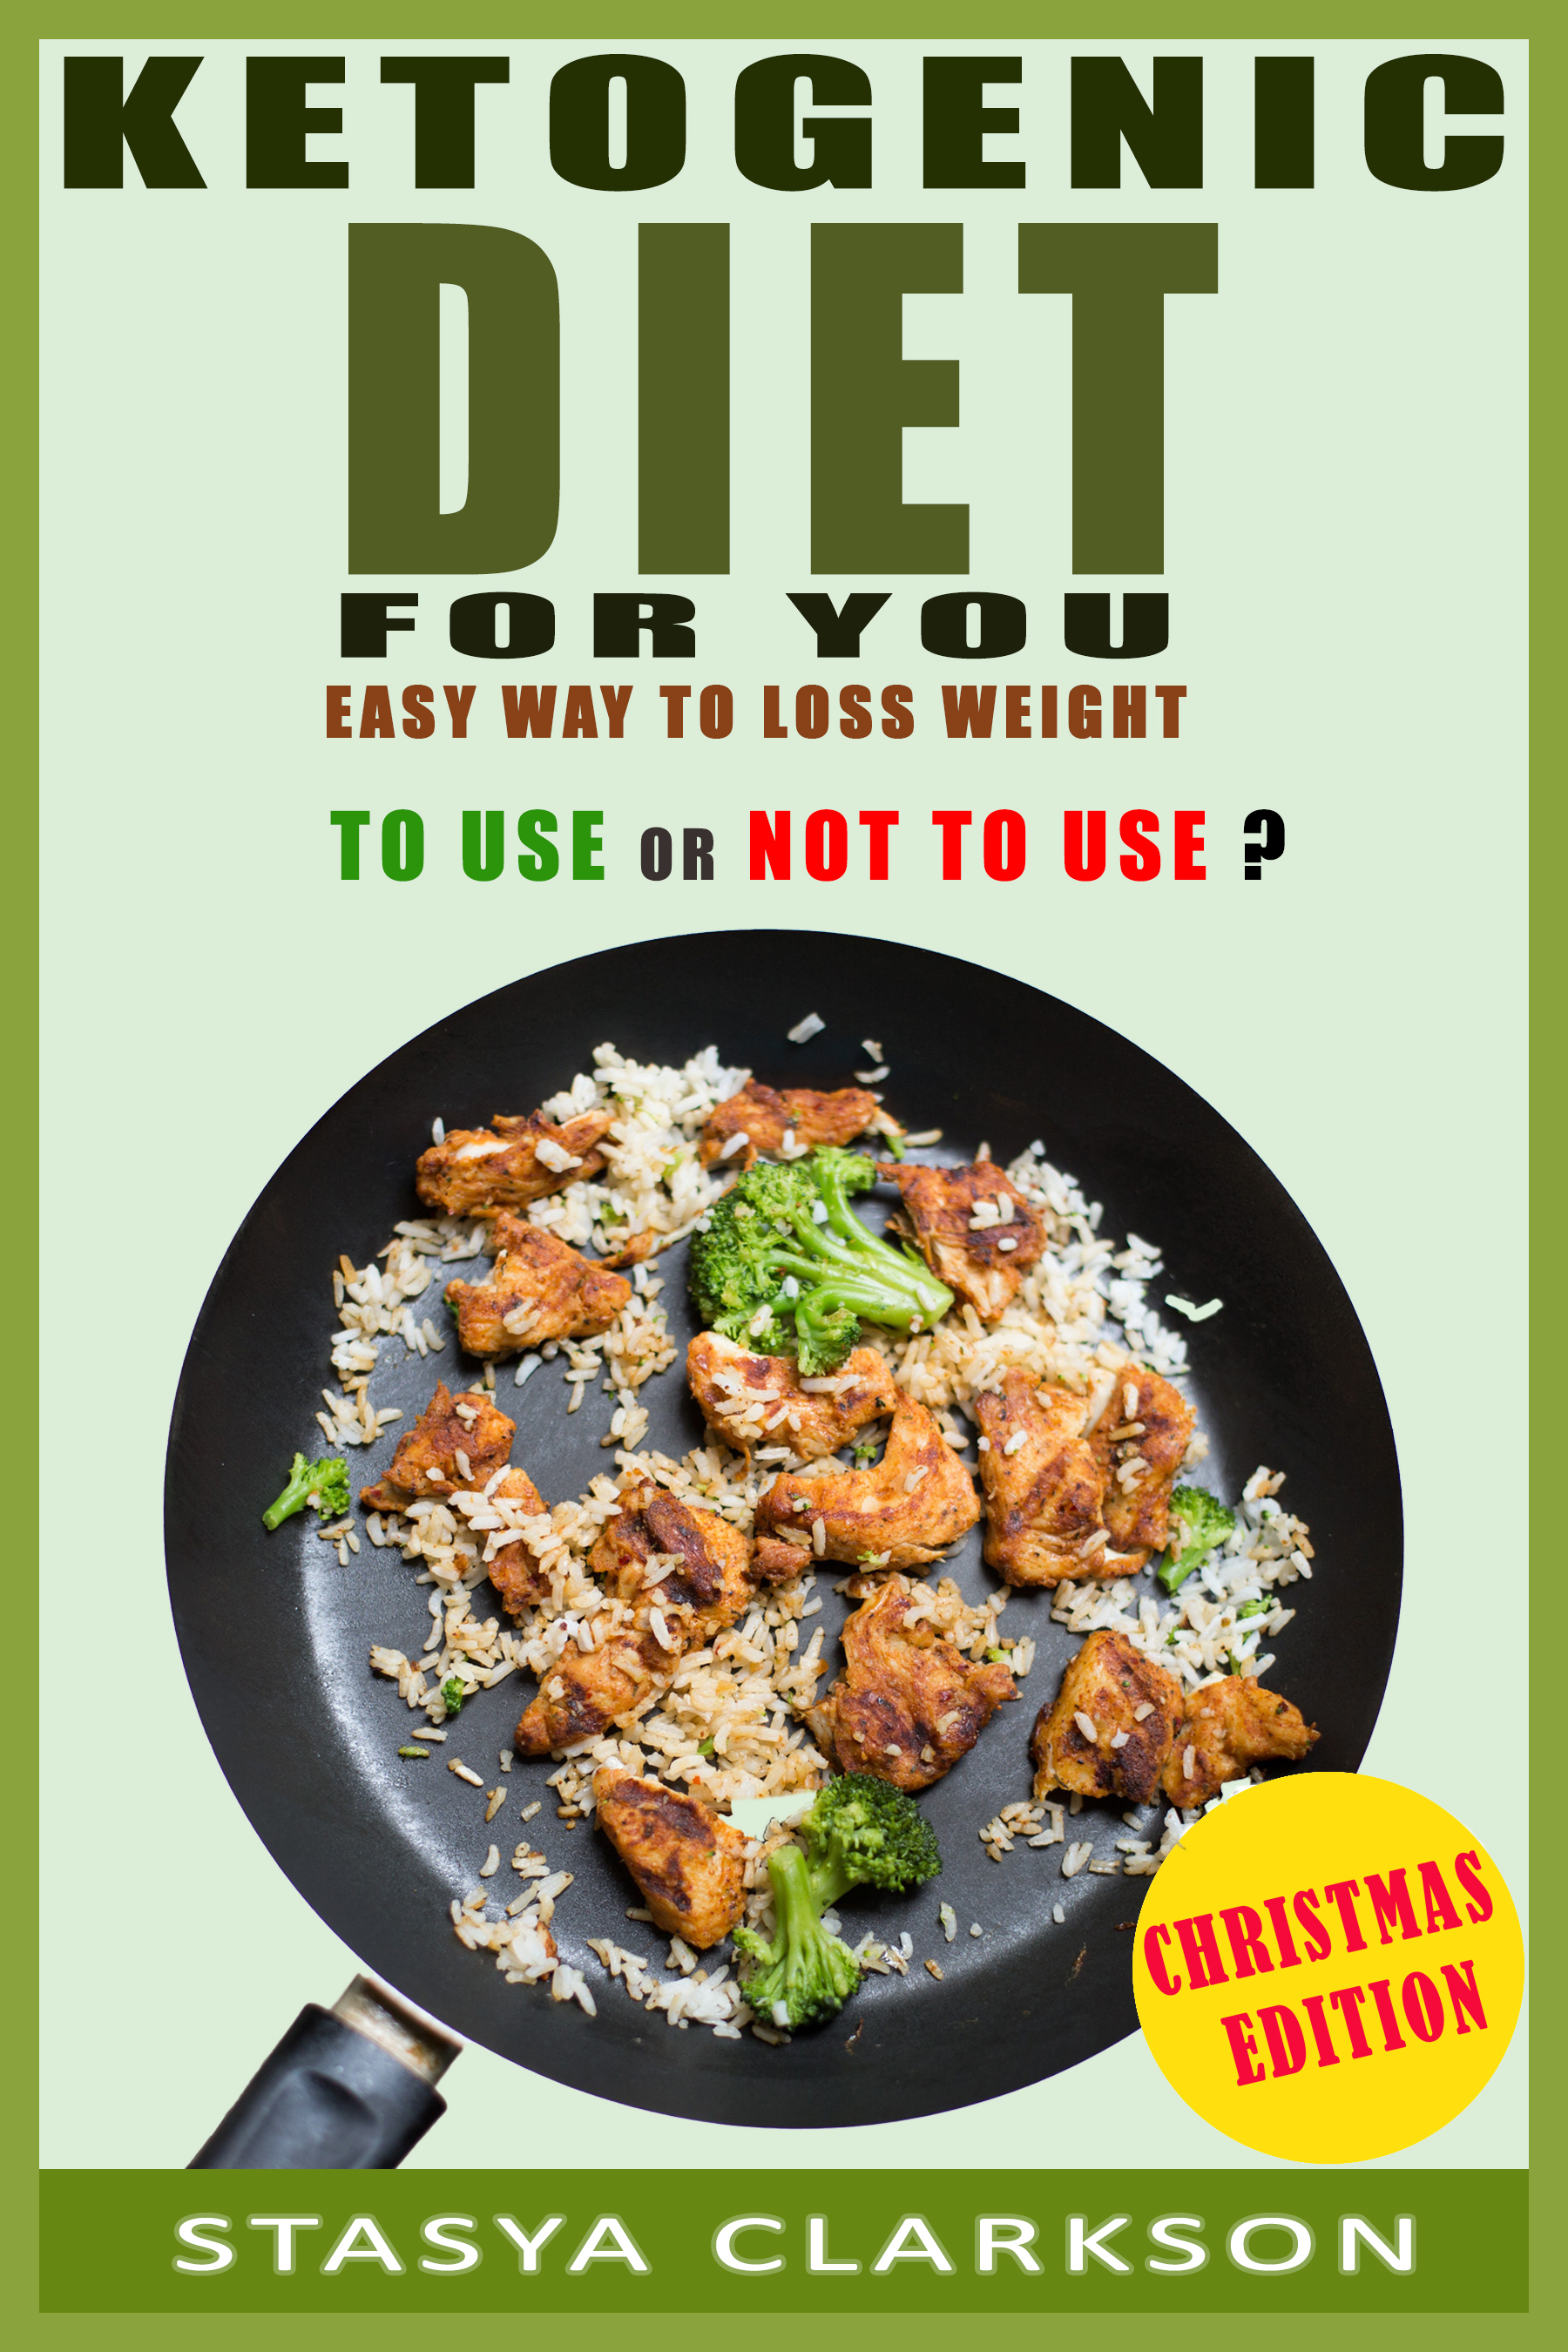 FREE: Ketogenic Diet for You by Stasya Clarkson